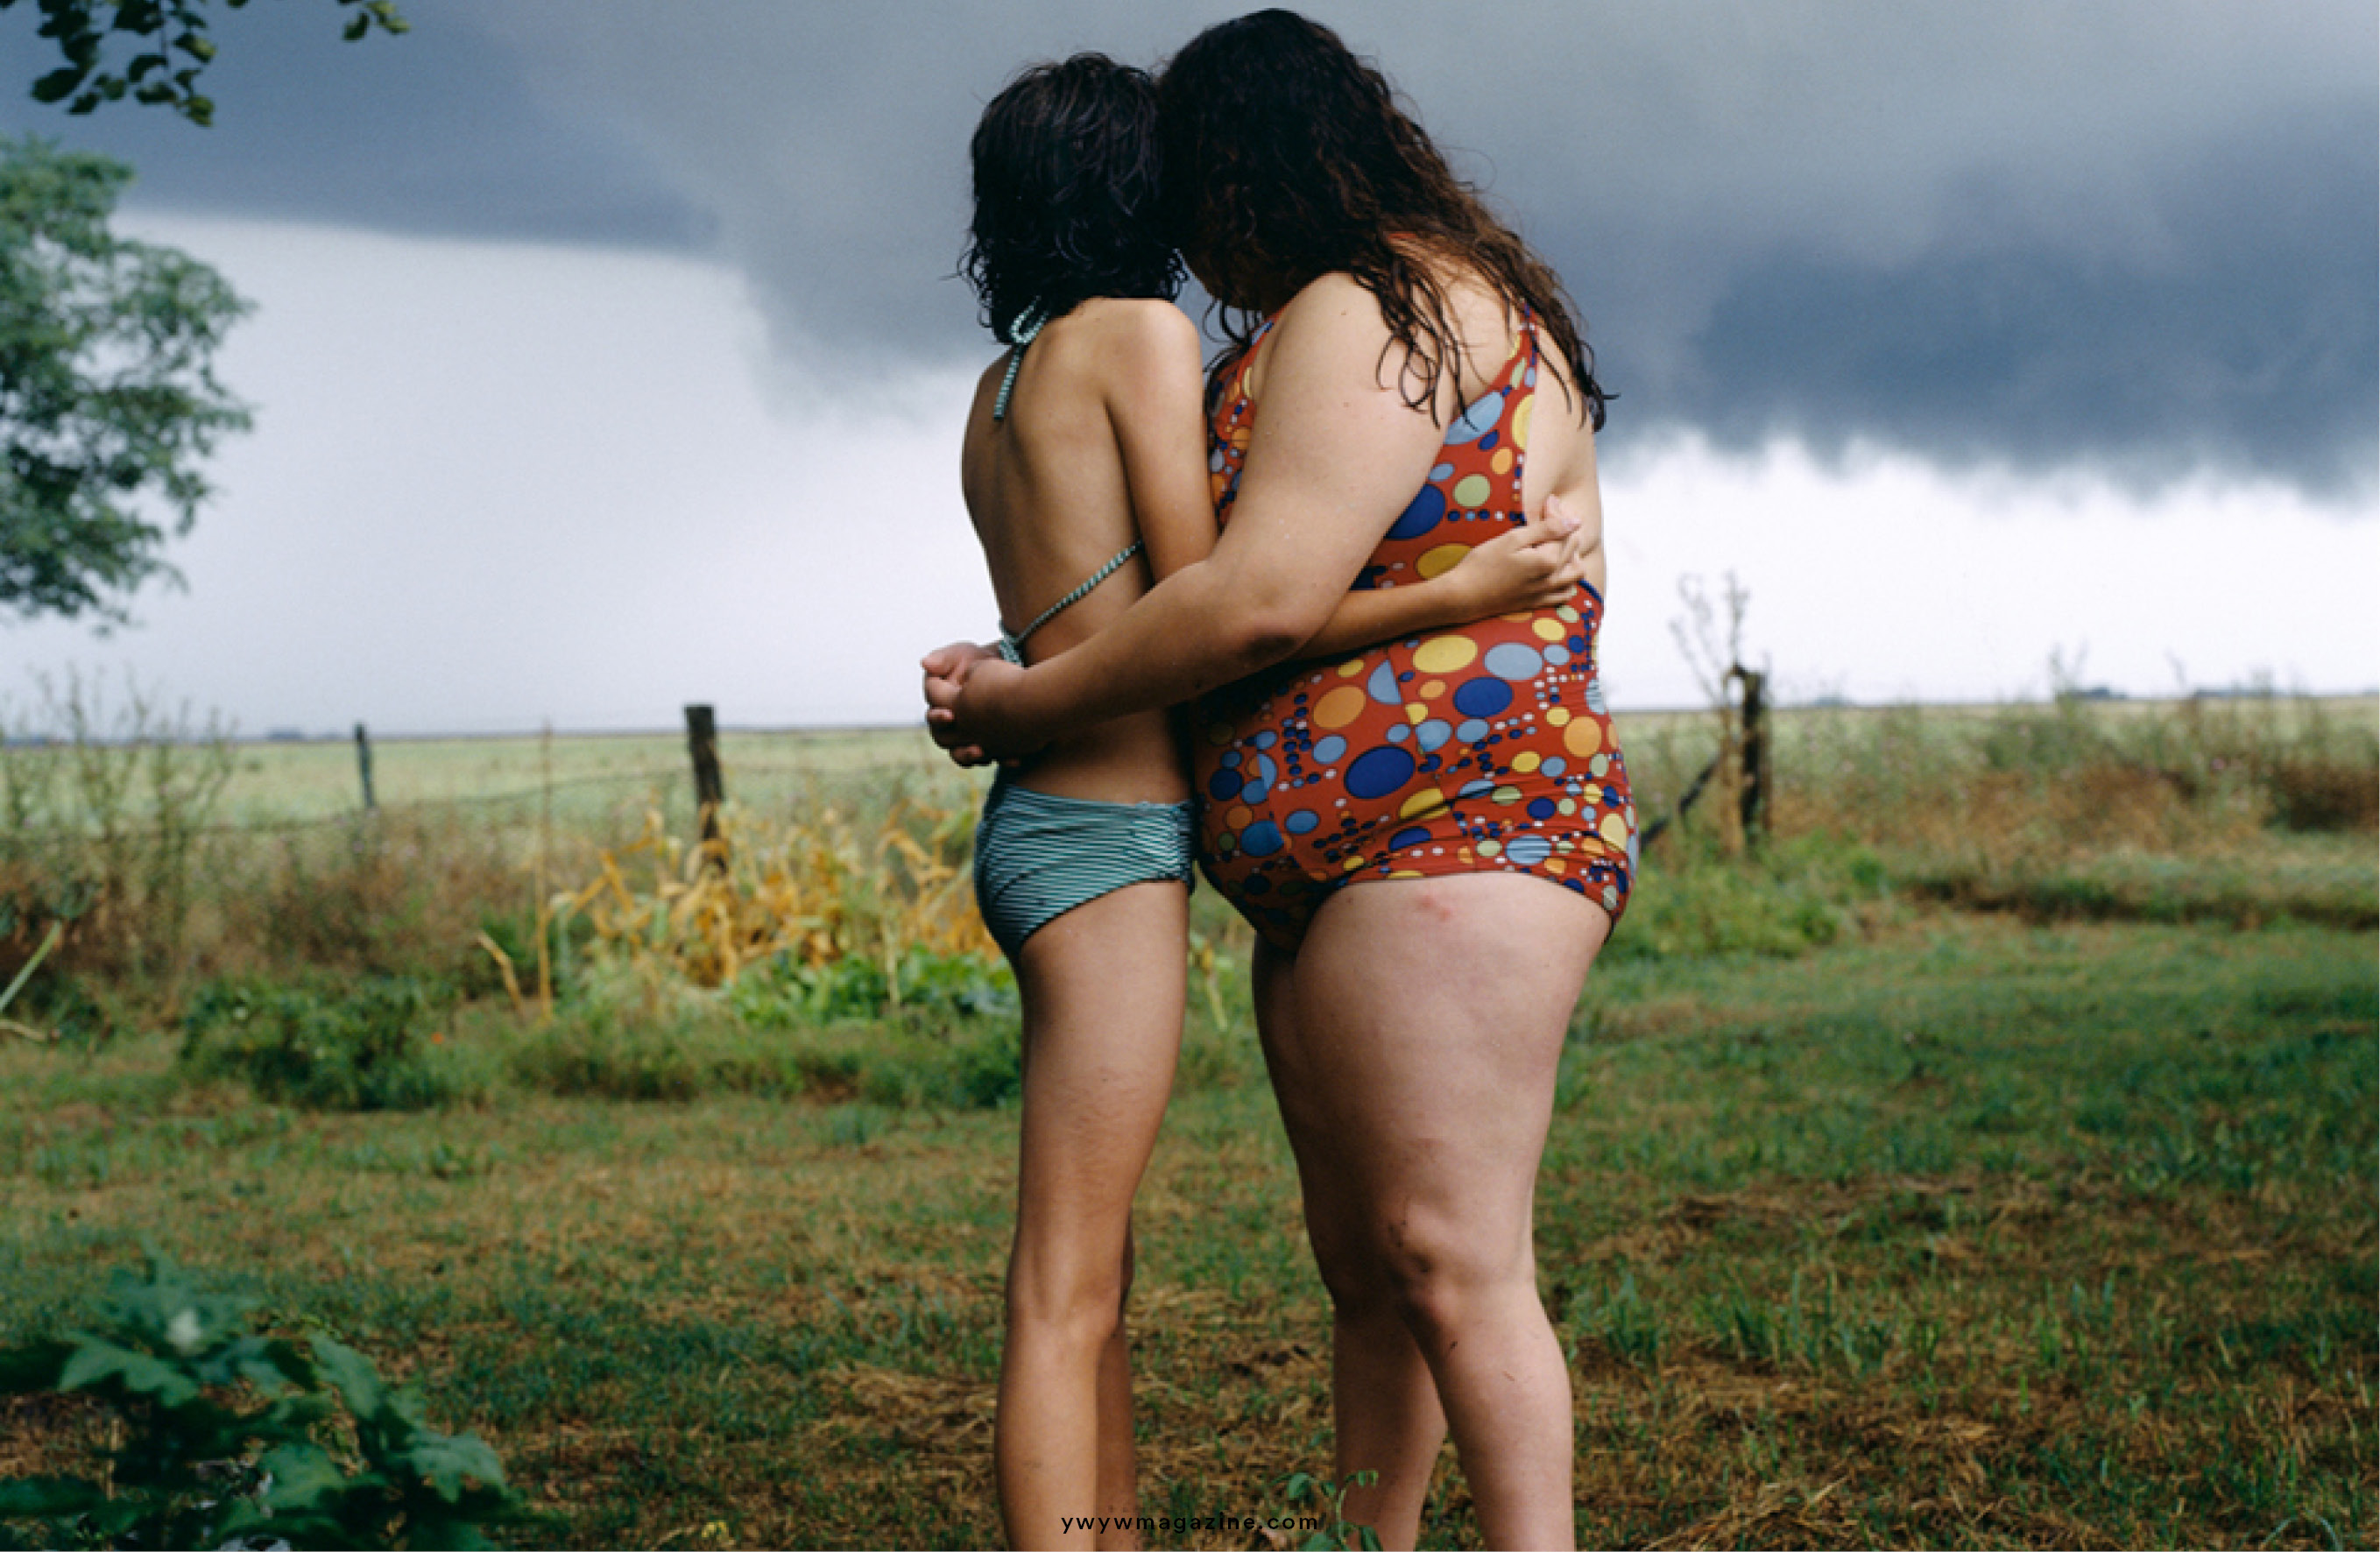 Alessandra Sanguinetti: “The Adventures of Guille and Belinda and The  Illusion of an Everlasting Summer” – YWYWMAGAZINE